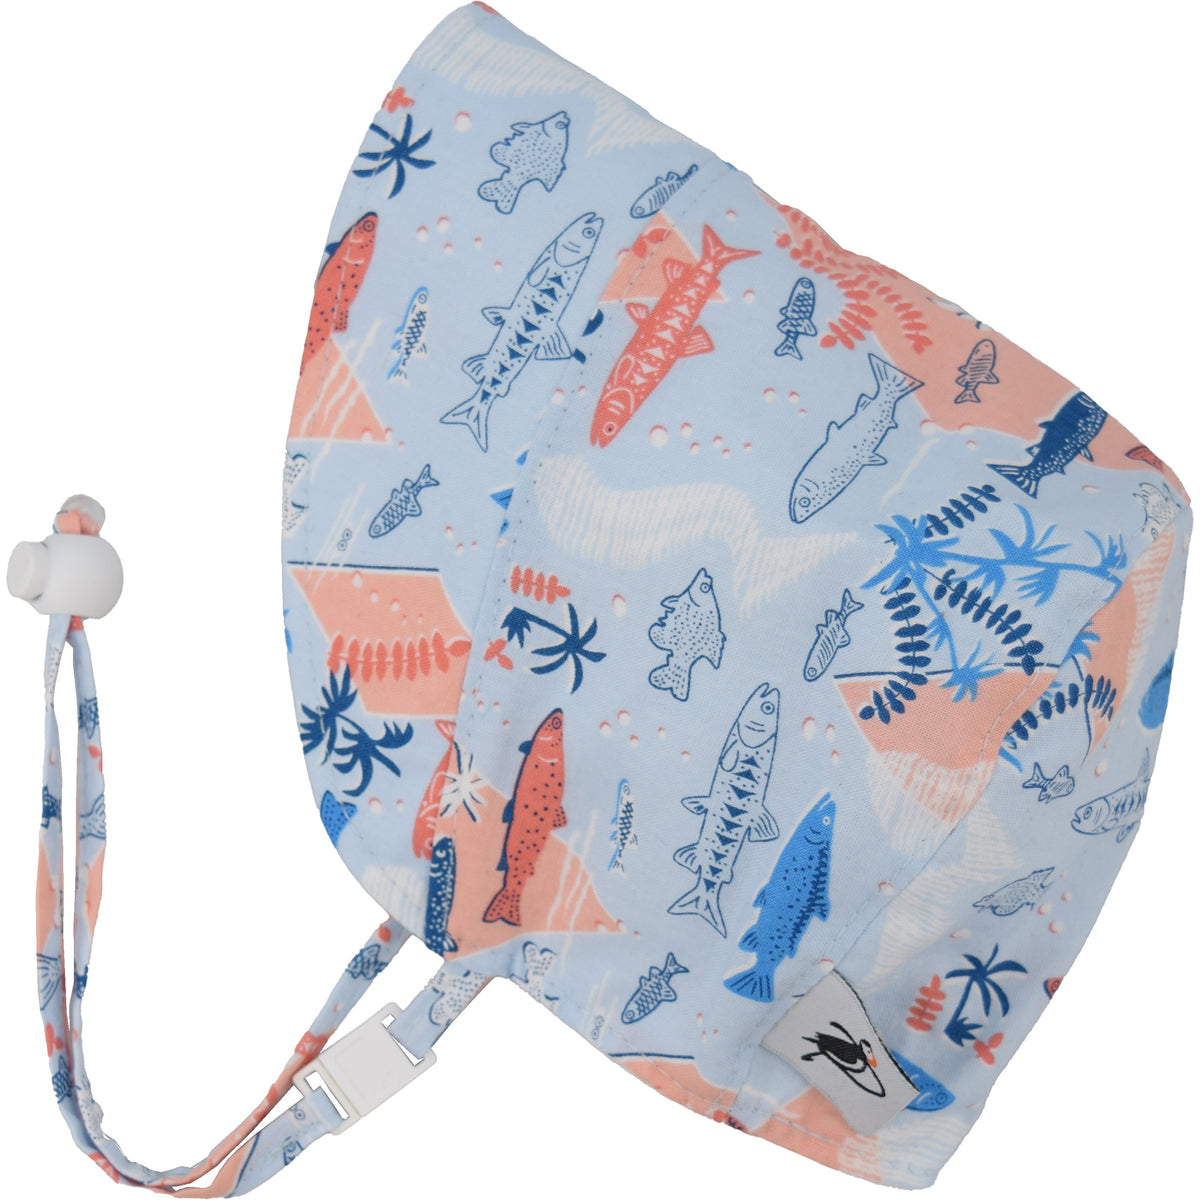 Infant and Toddler Sun Protection  Summer Bonnets with UPF50 Sun Protection. A chin tie with toggle and break away clip keep bonnet safely on head. Made in Canada by Puffin Gear -Vintage Hawaiian Shirt Snorkel Print in Blue and Coral